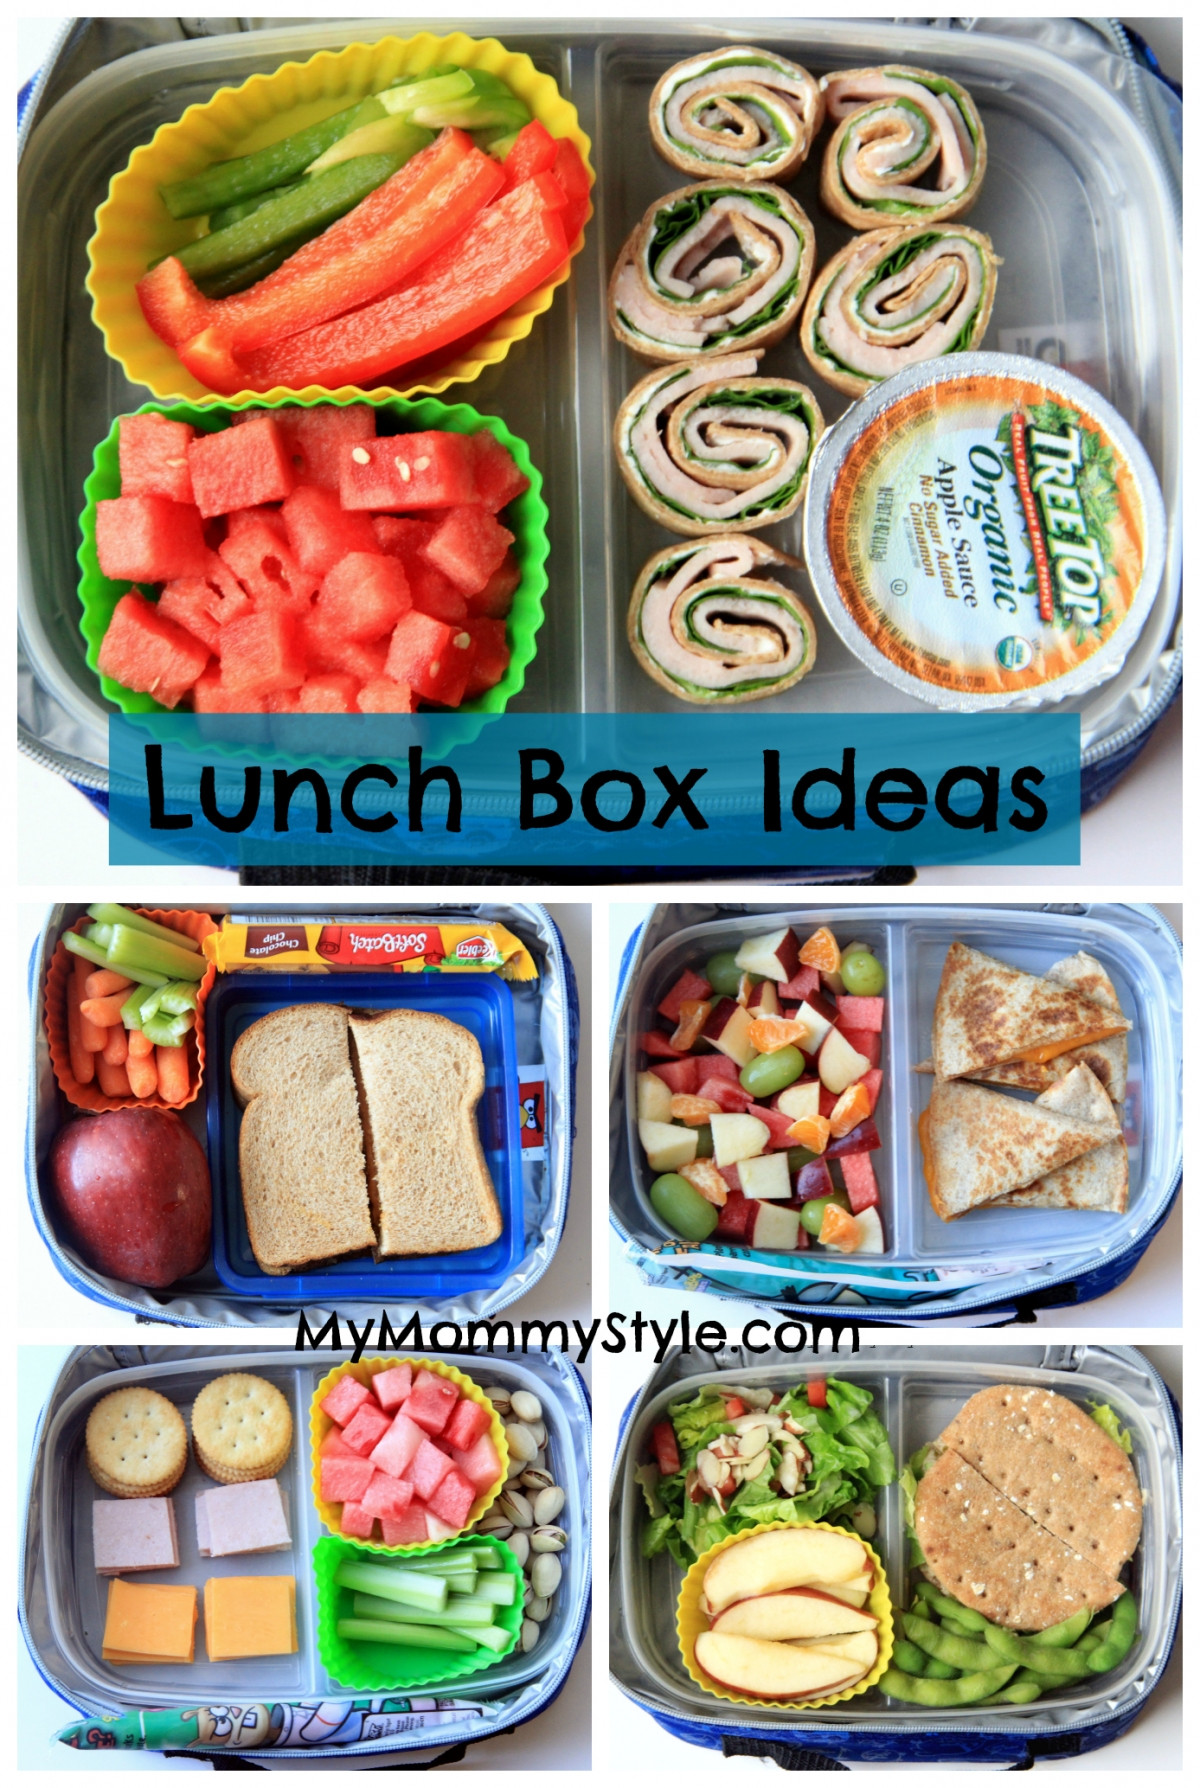 Clean Eating For Kids
 Lunch box ideas kid lunches school lunch cold lunch ideas